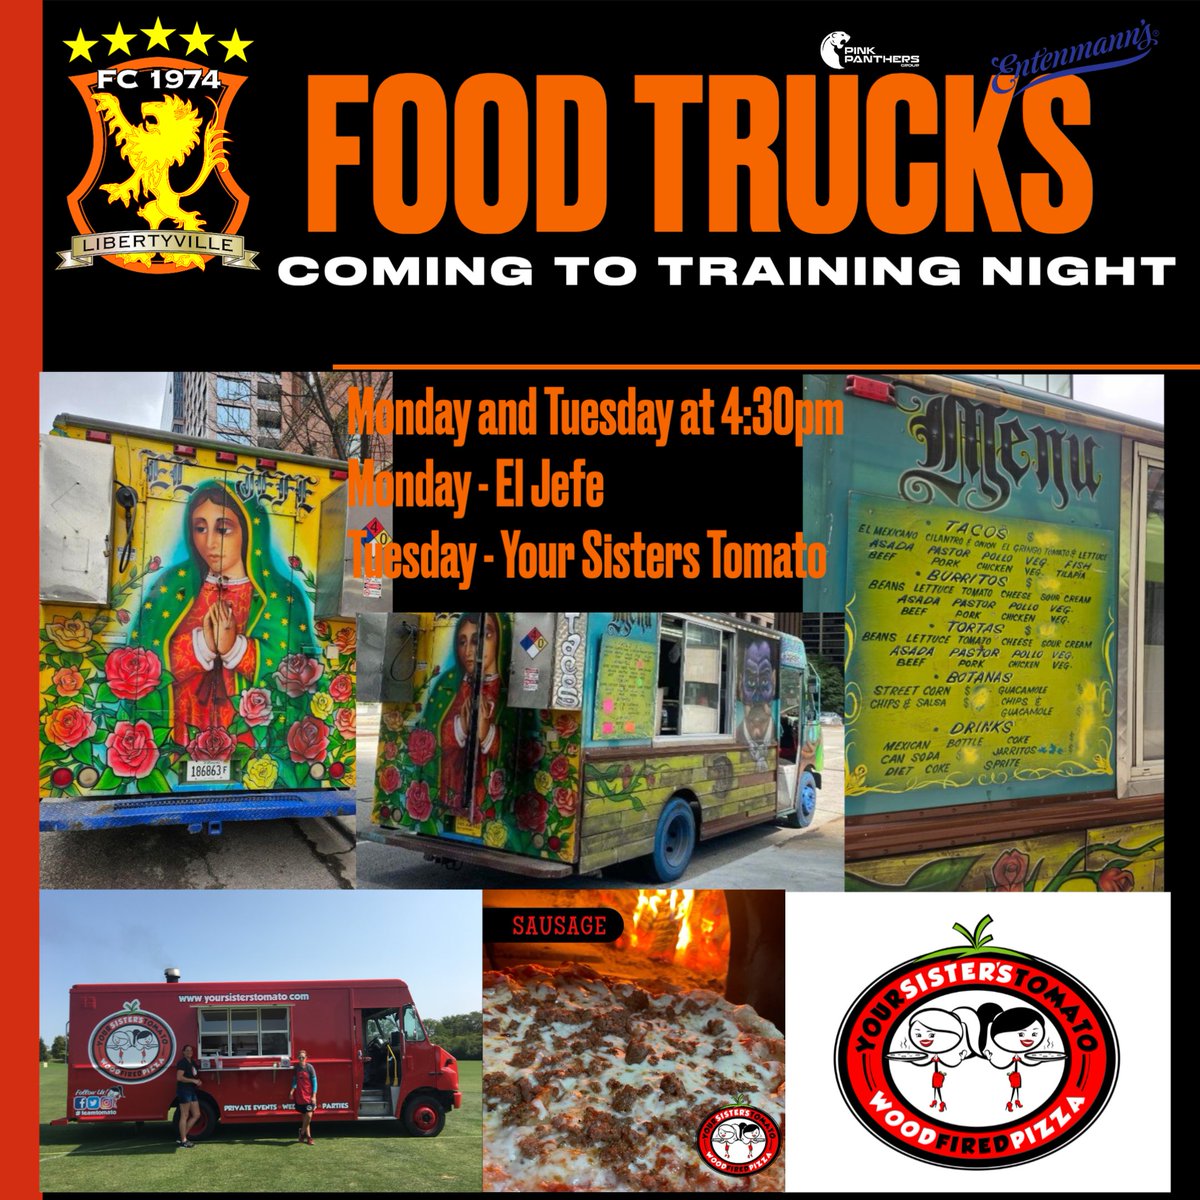 Dinner plans made easy Monday and Tuesday night this week! Food trucks will be parked next to the turf field. Come out and come hungry! #weare74